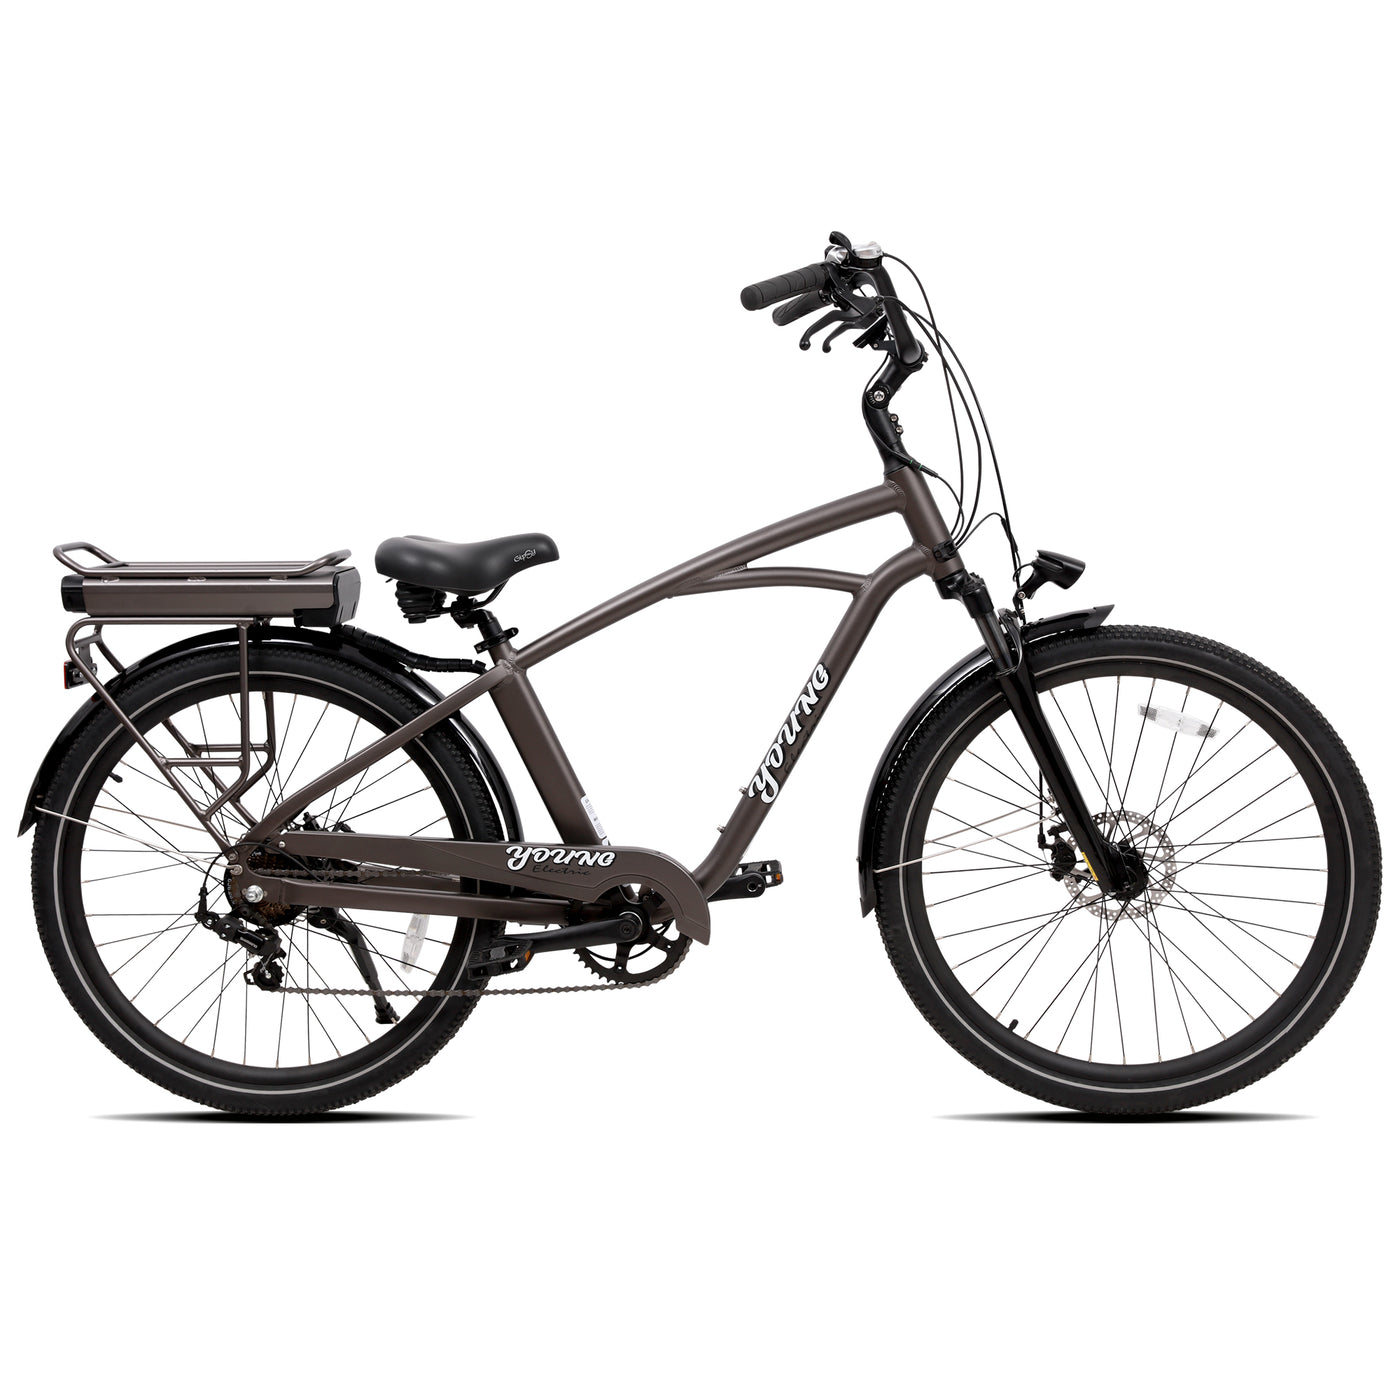 Young Electric Vie 27.5’’ Cruiser | 350W Ultra-Comfy Ebike, Up to 90 Miles Riding Range, Shimano 7-Speed,  Torque Sensor